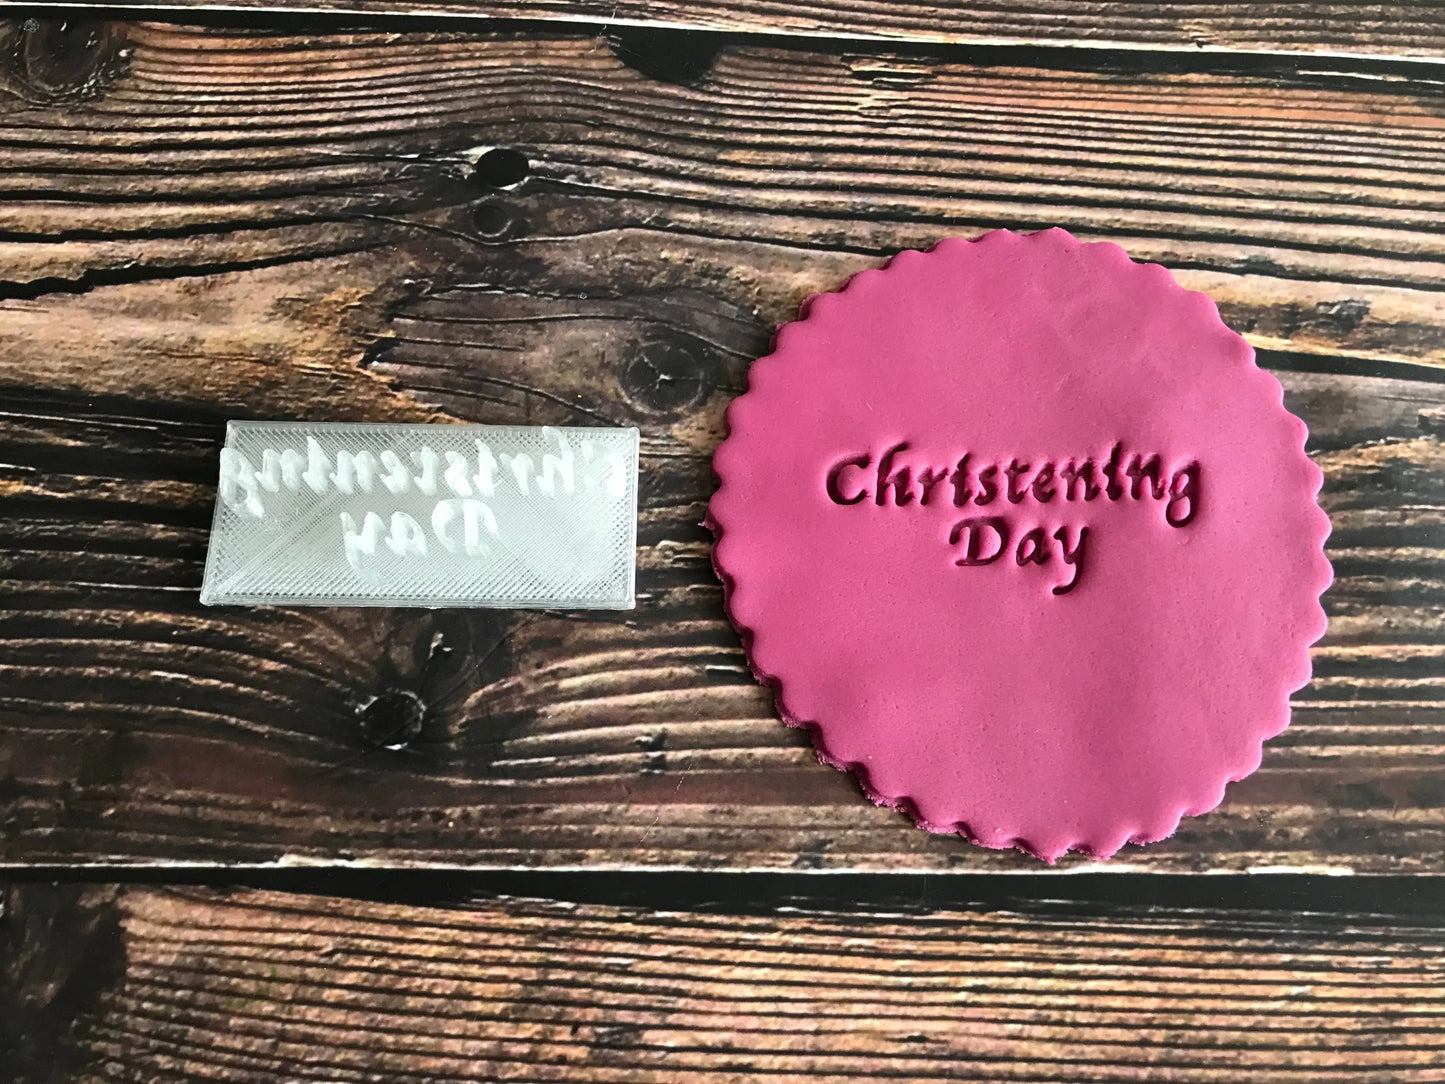 christening day - Embossing - stamp MEG cookie cutters